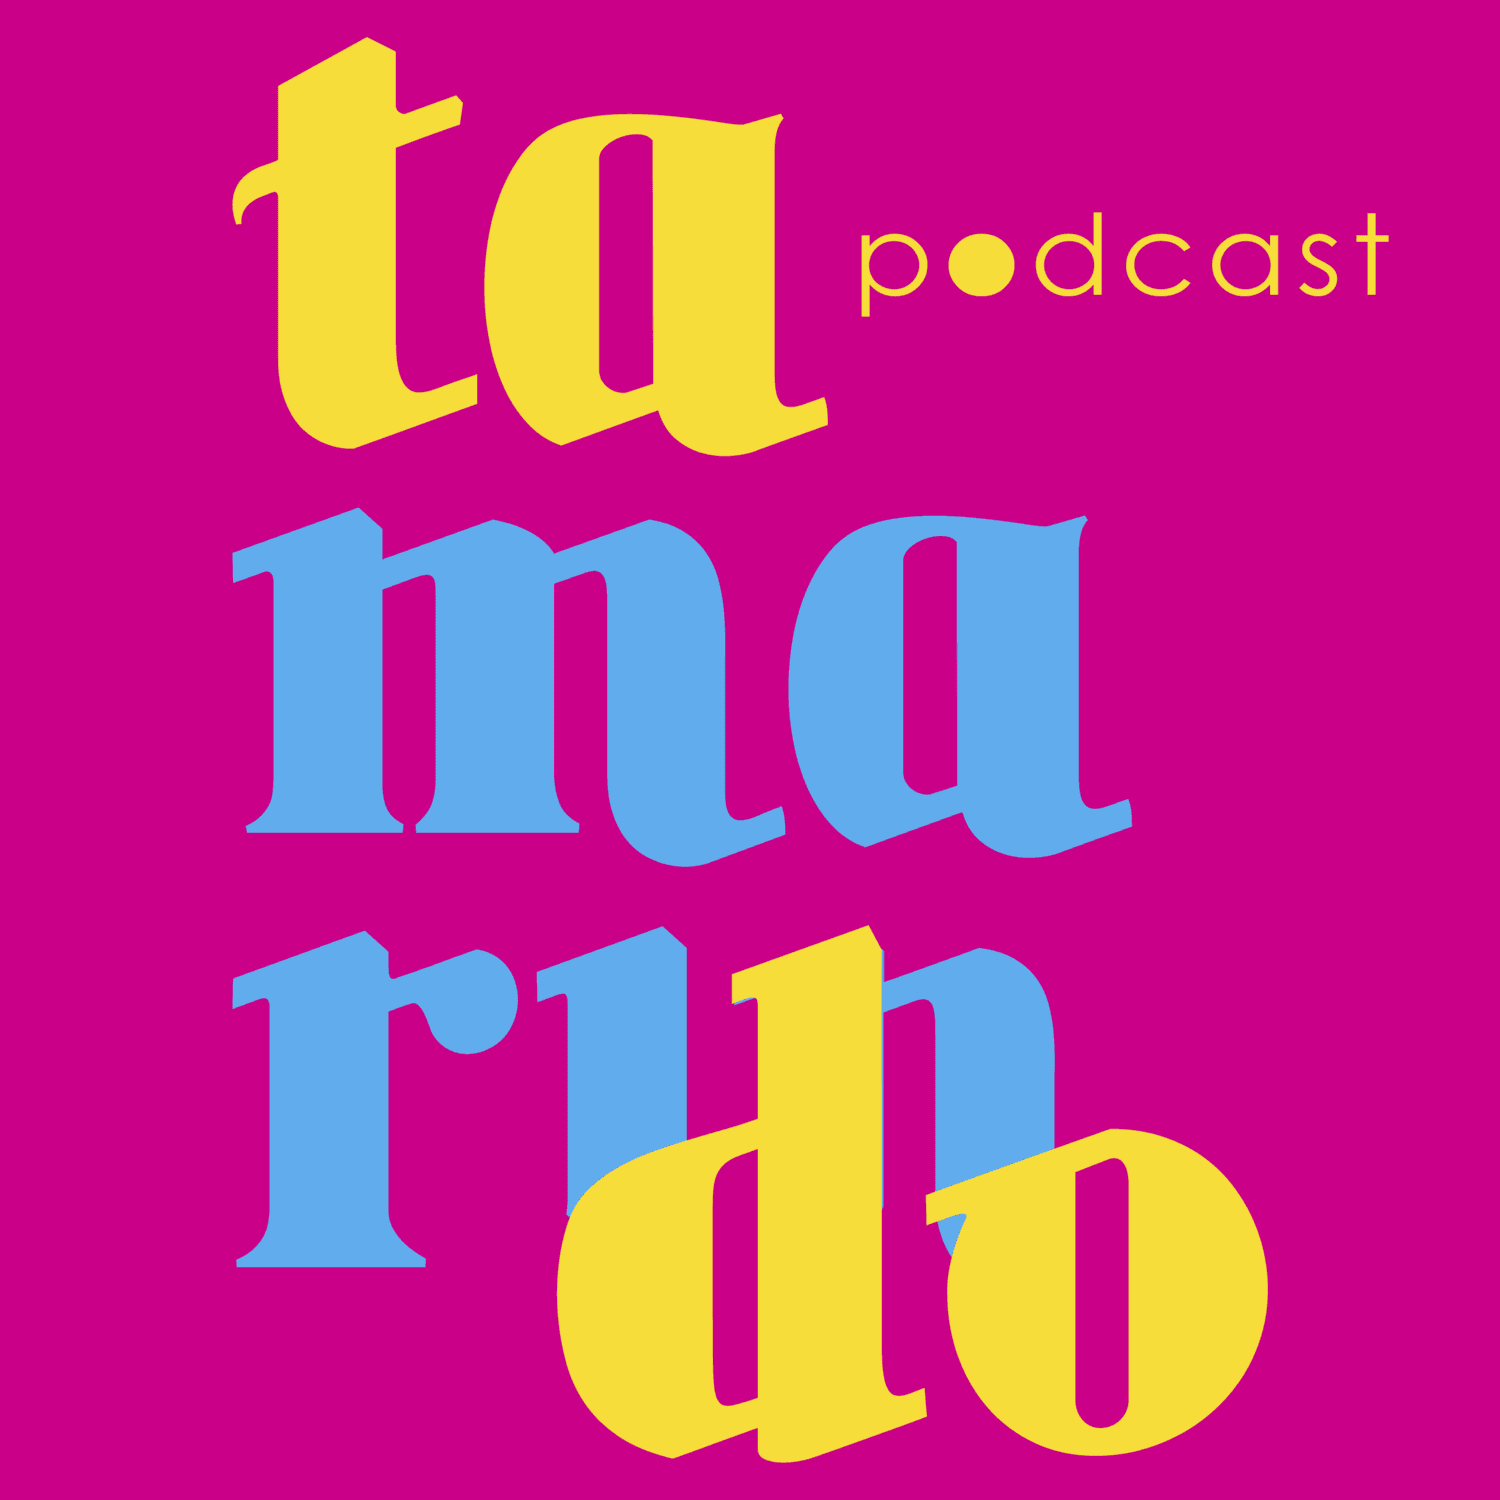 Thumbnail for "223: From Tamarindo Podcast: Chicano, Latina, Latinx... What's in a Name?".